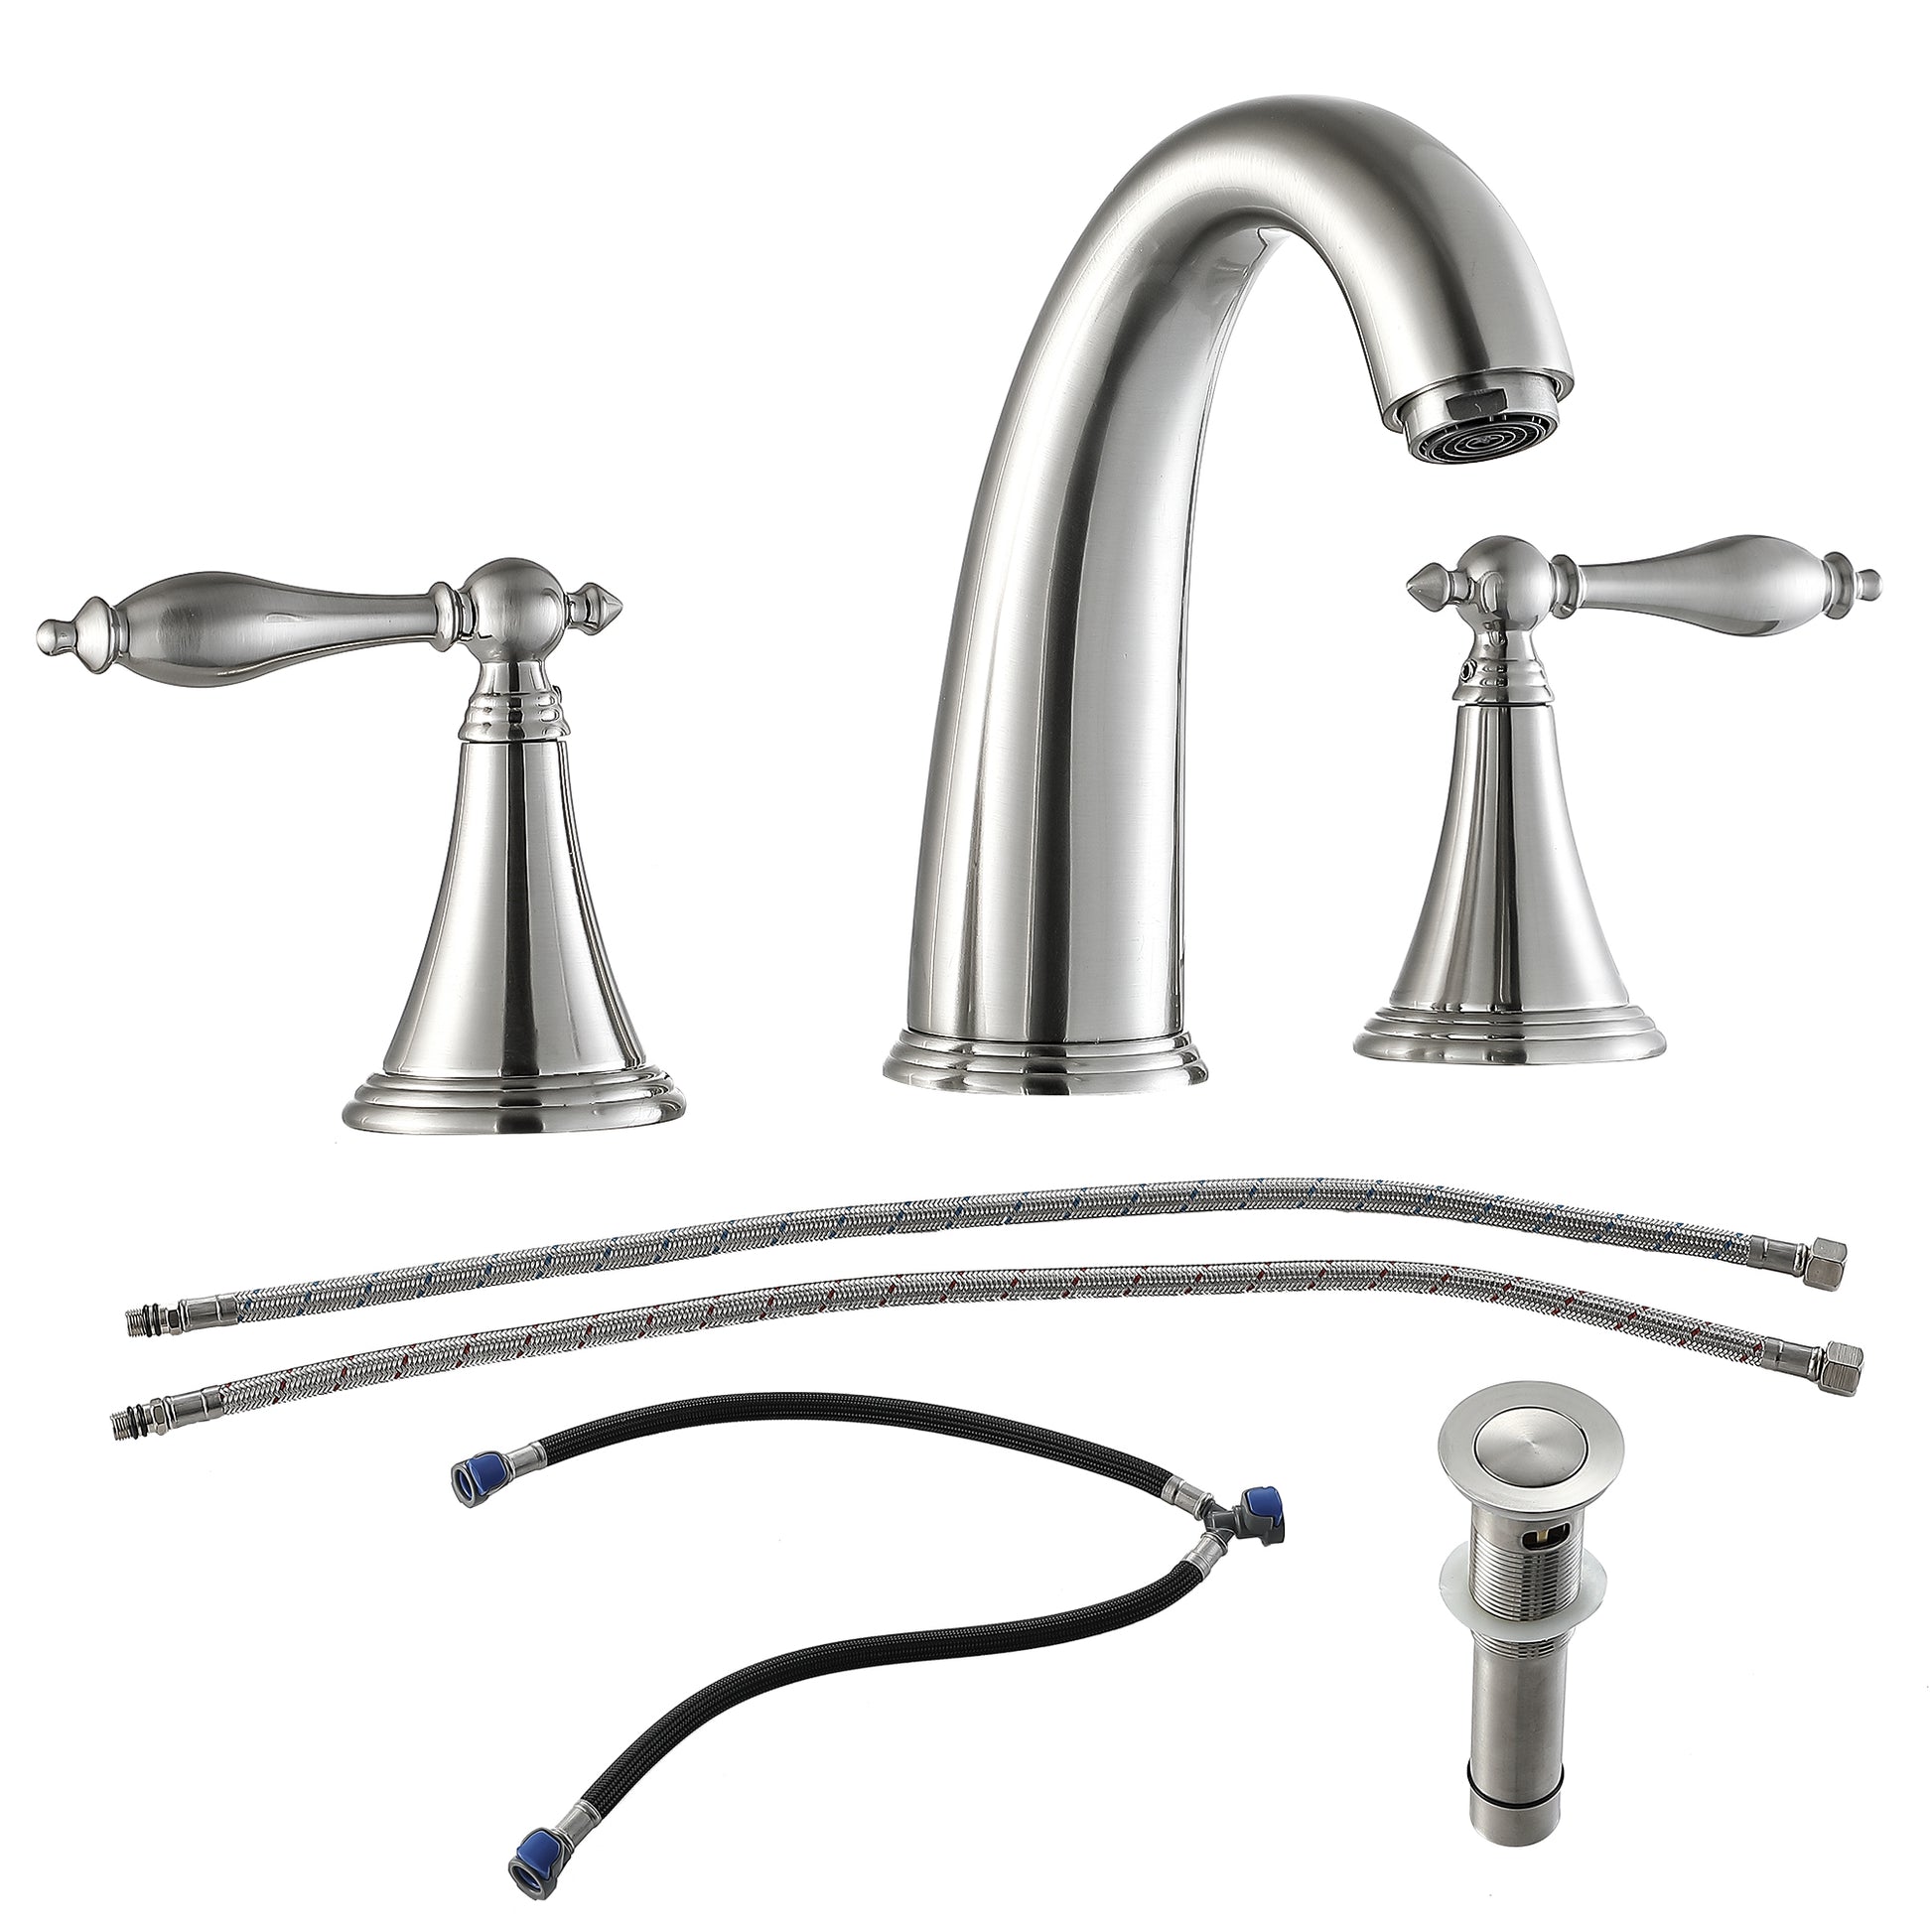 2 Handle Widespread Bathroom Faucet 3 Hole, with Pop brushed nickel-stainless steel